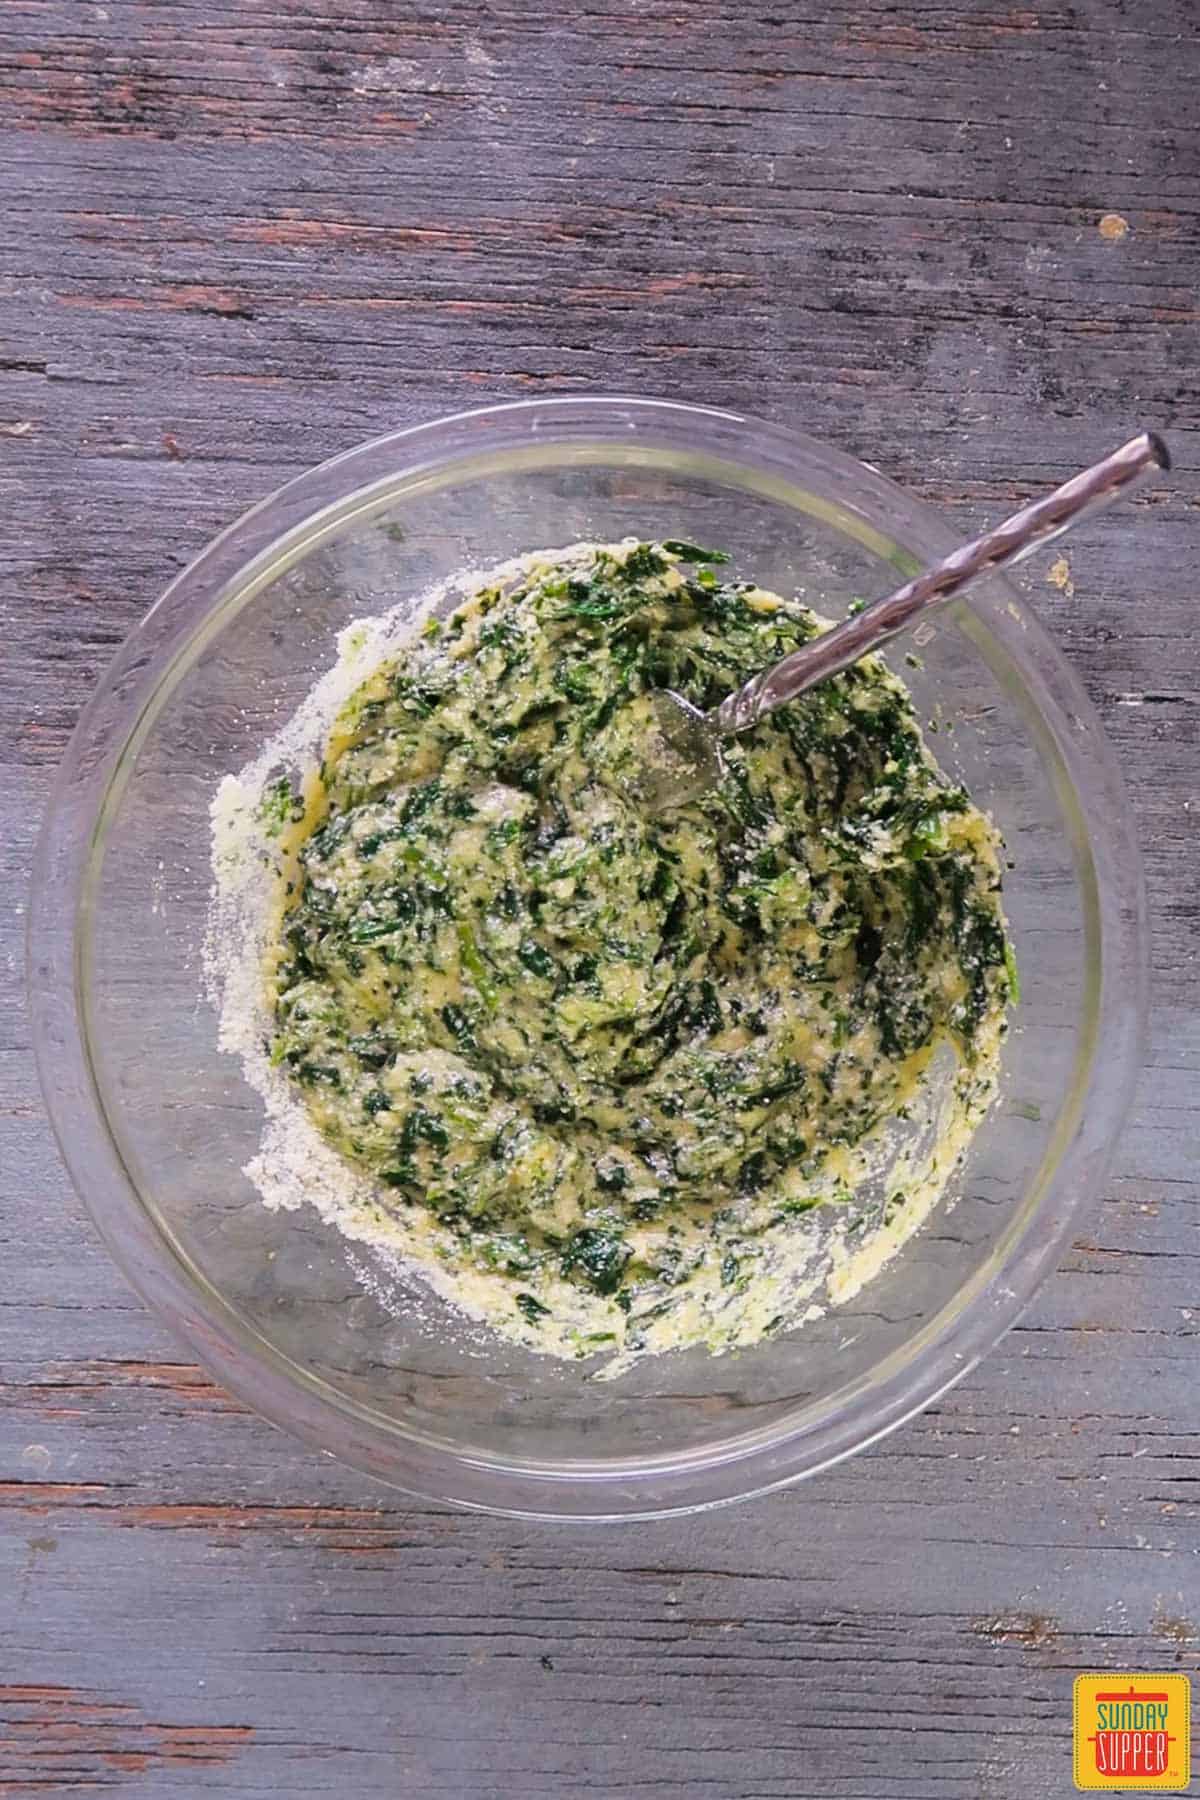 Spinach and egg mixture for Italian wedding soup